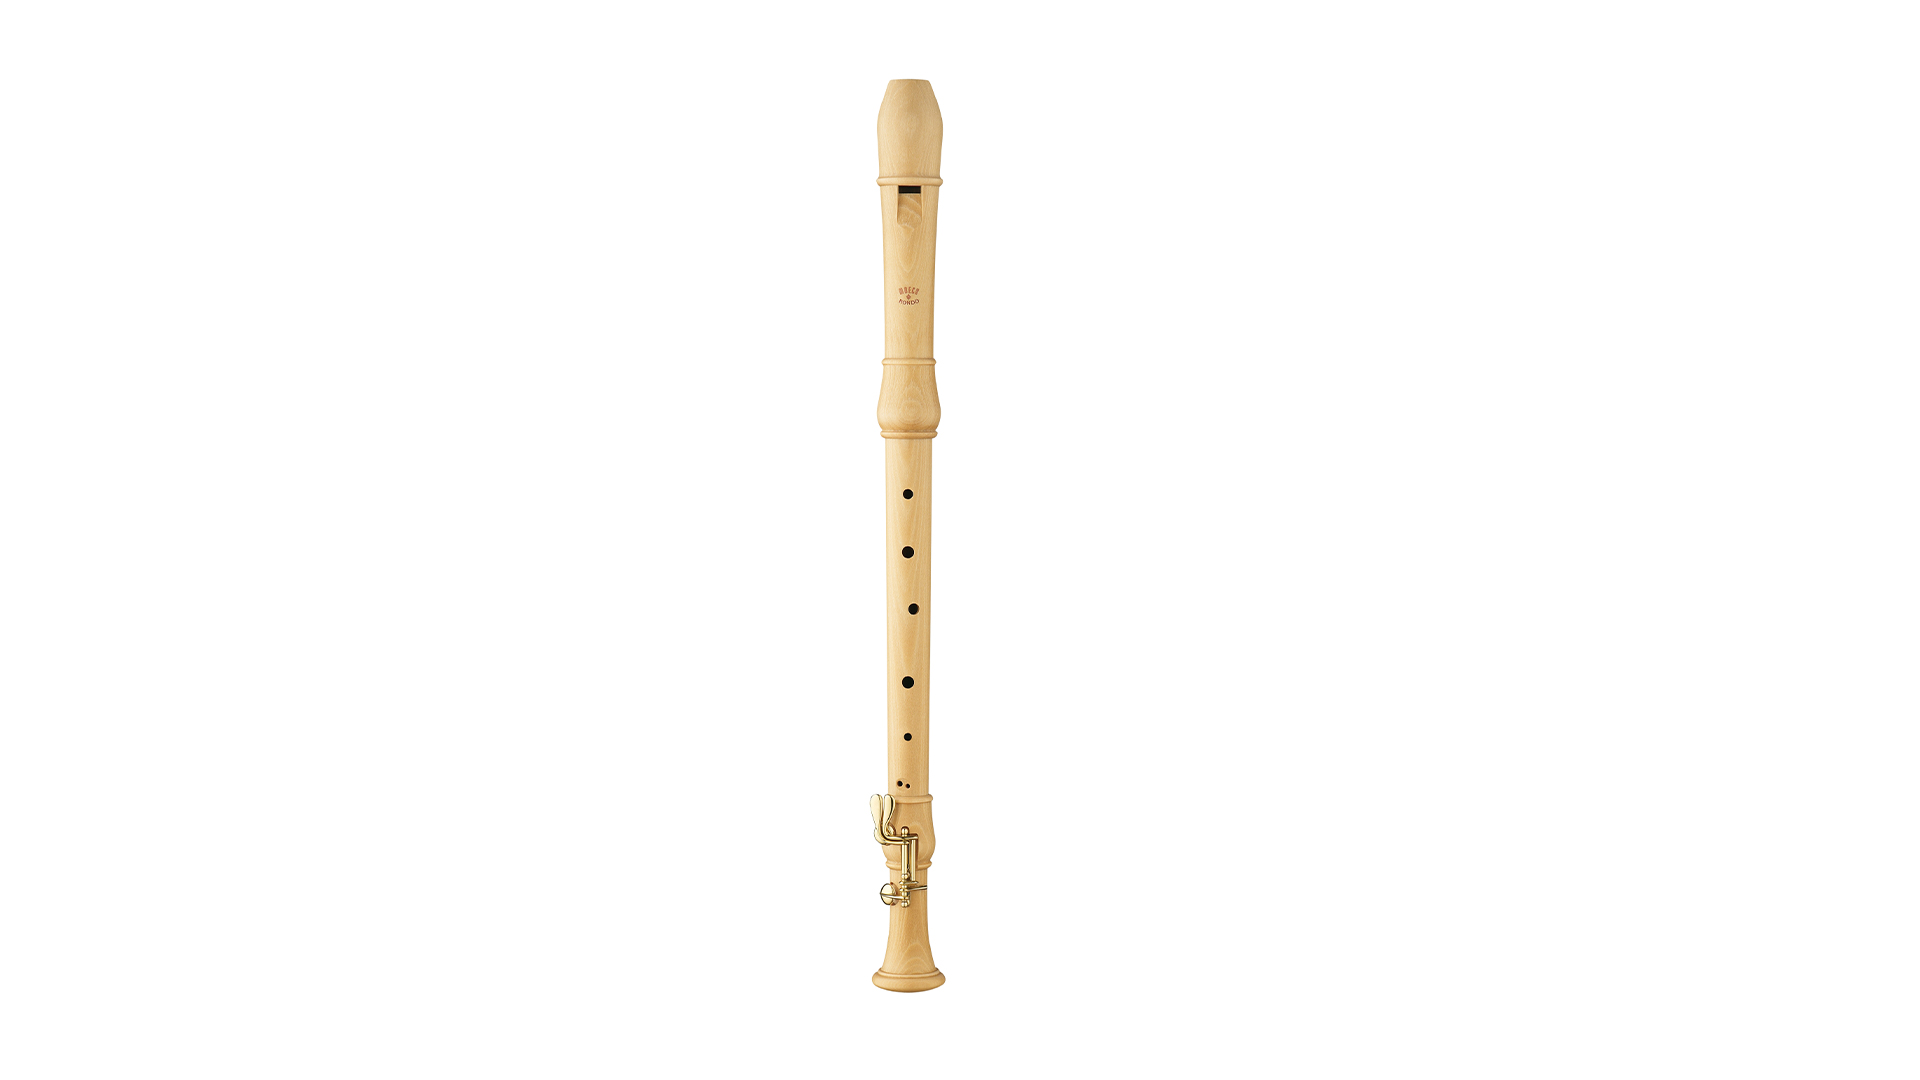 Moeck, "Flauto Rondo", tenor in c', german double hole, with double key, maple